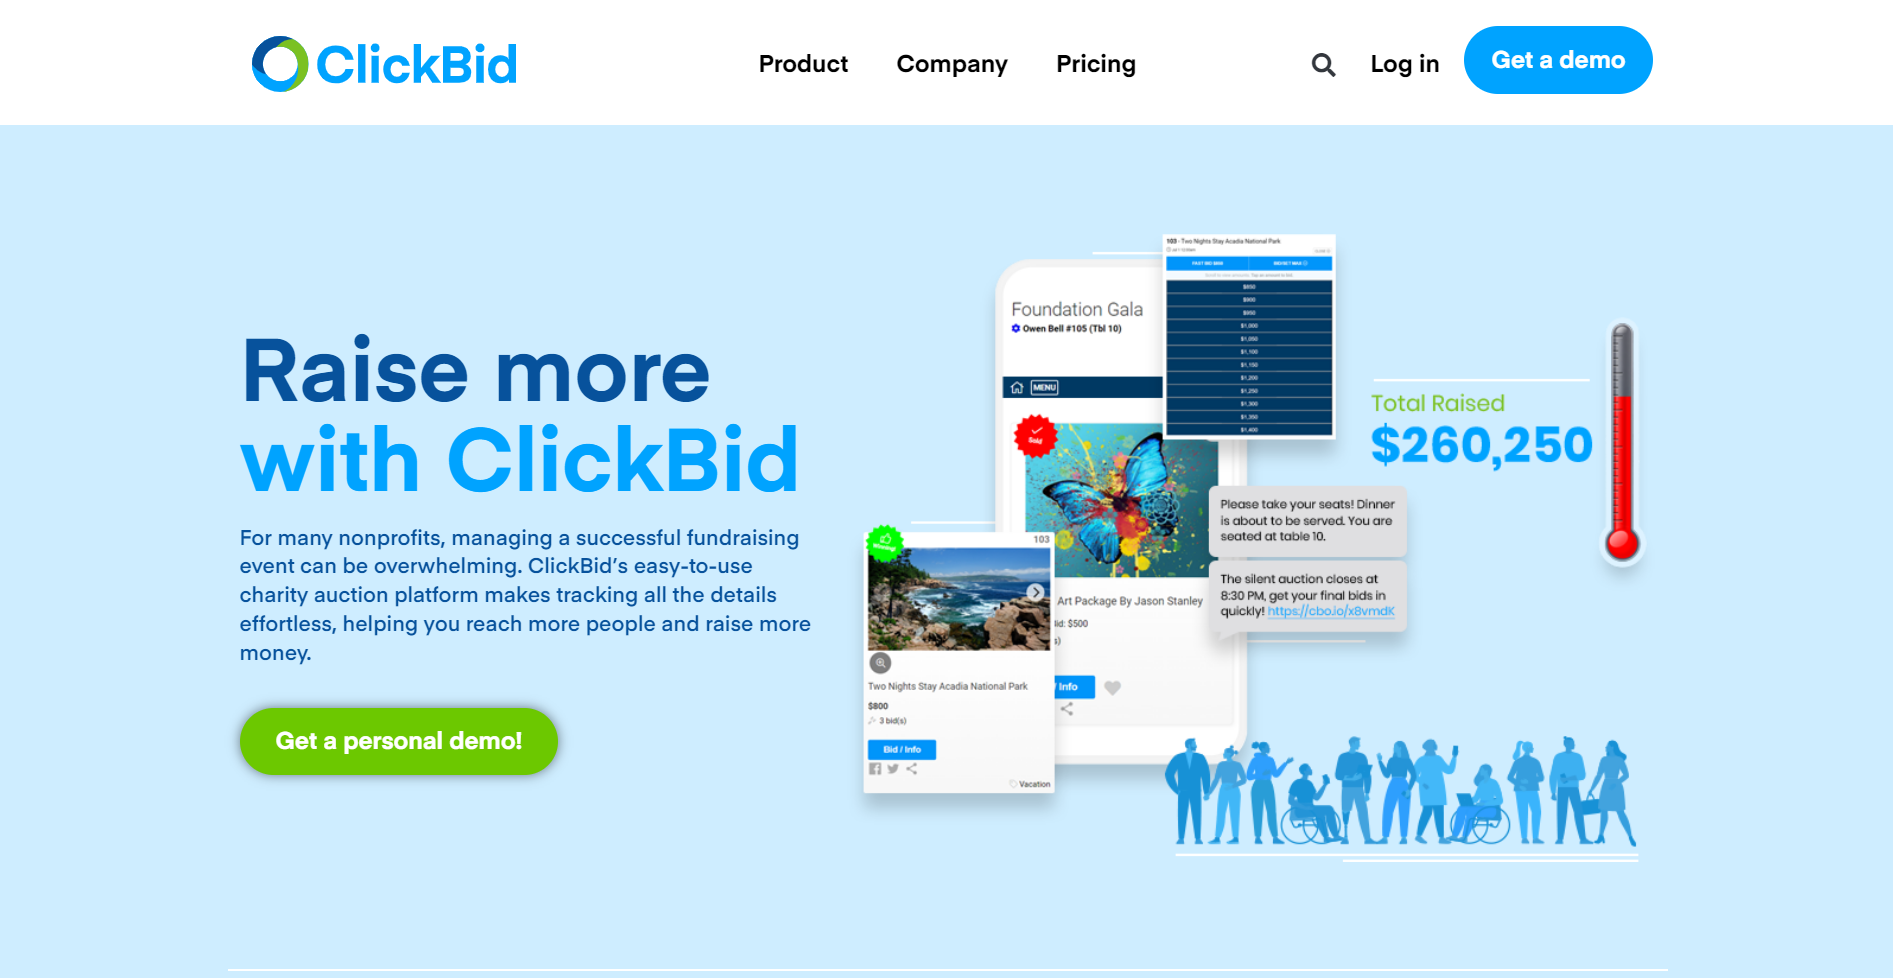 This image shows ClickBid's website, which provides more information about their mobile bidding software.